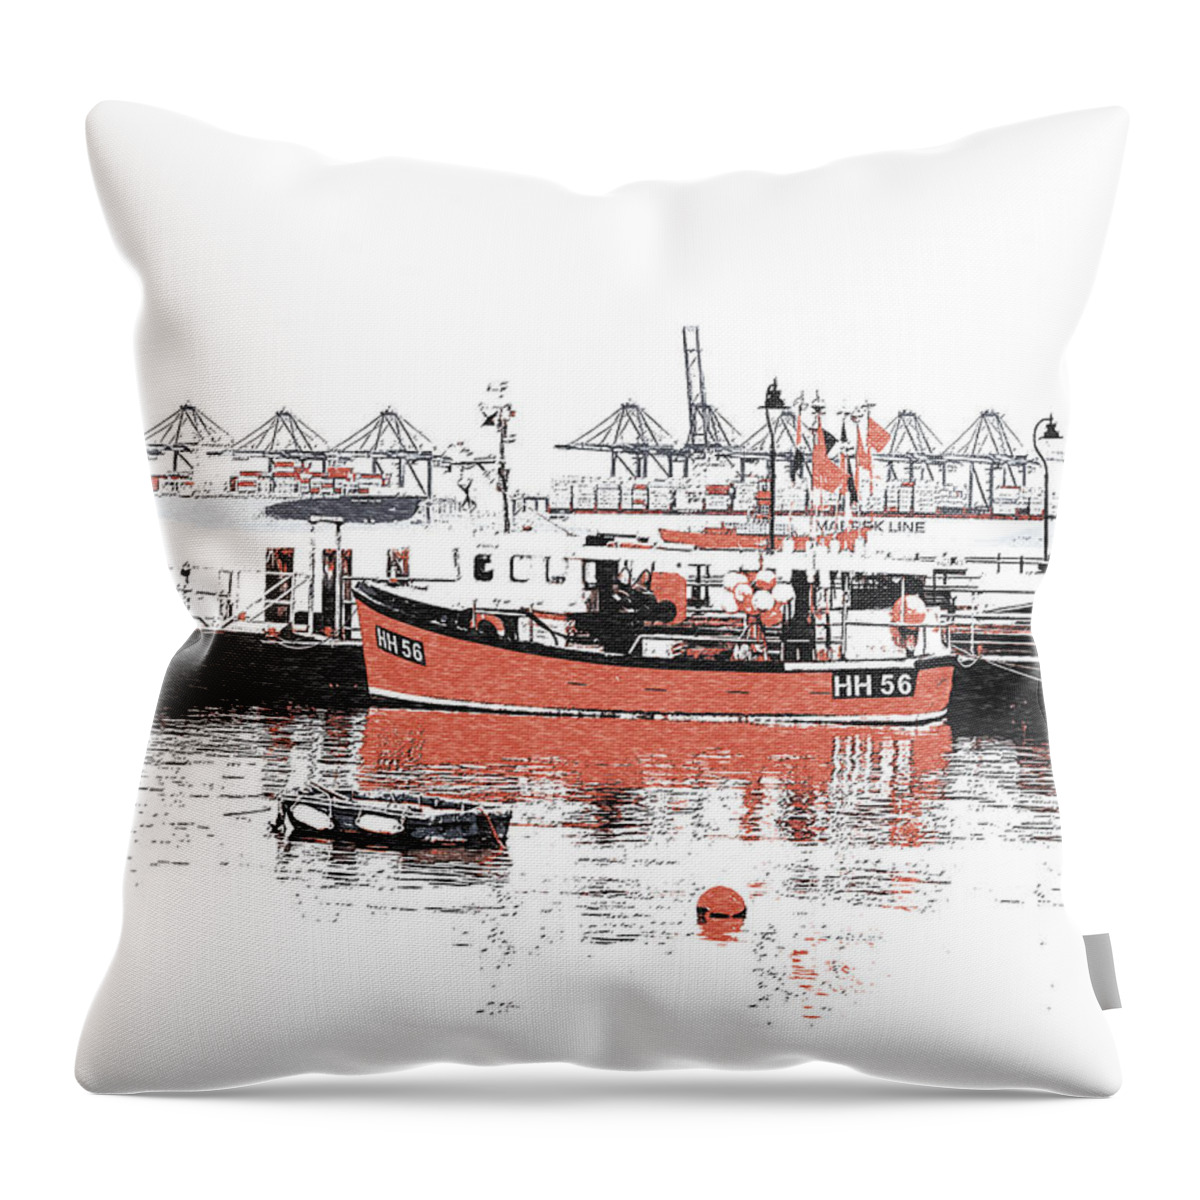 Richard Reeve Throw Pillow featuring the photograph Harwich - Fishing Boat by Richard Reeve